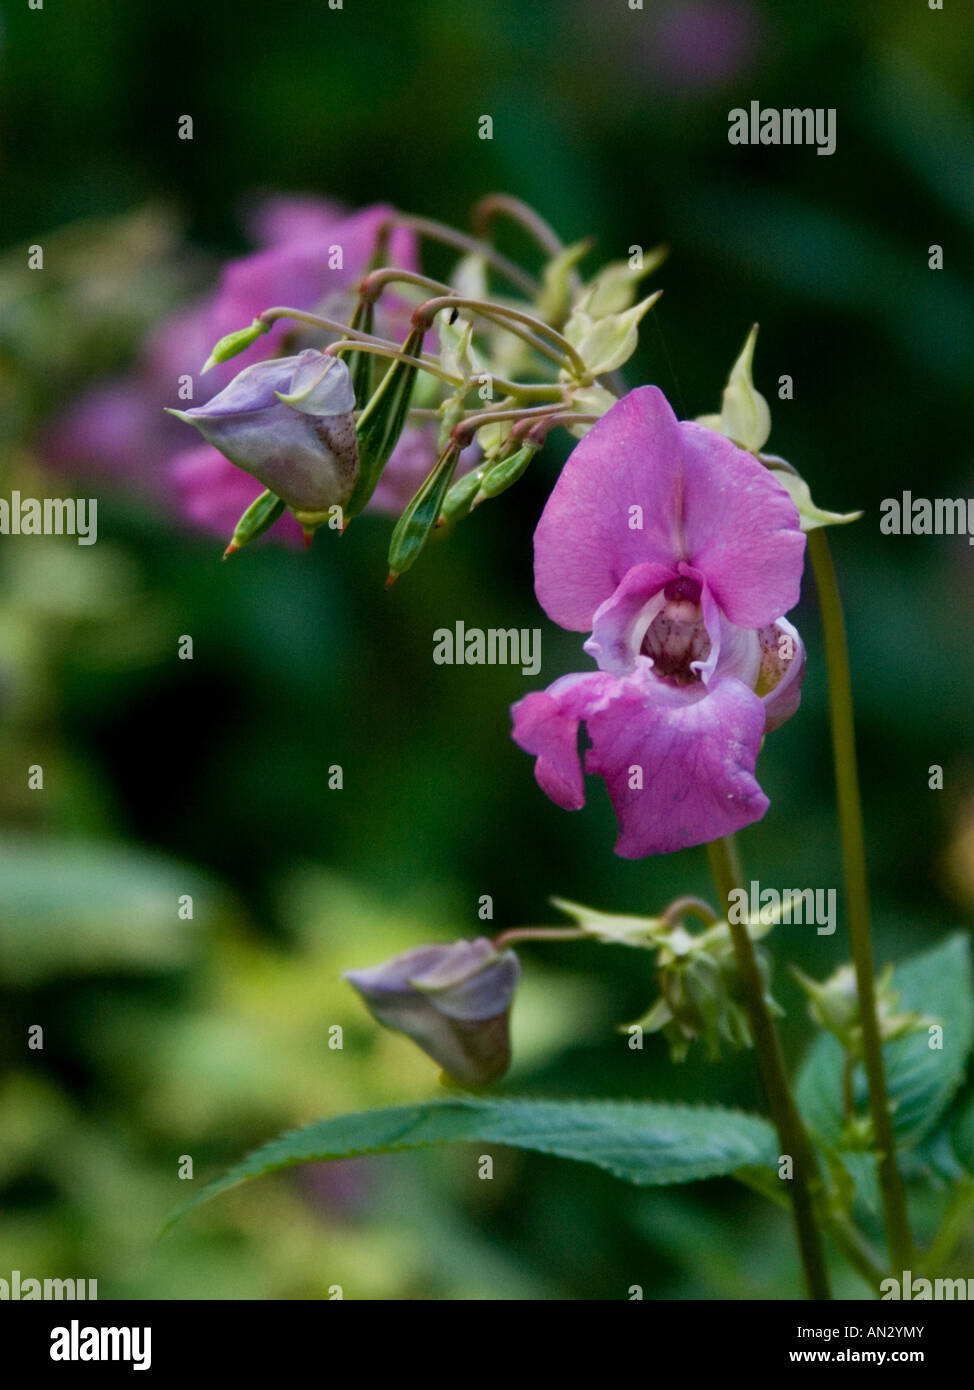 Close up of wild flower Impatiens Glandulifera also known as Policeman's Helmet and Himalayan or Indian Balsam Stock Photo